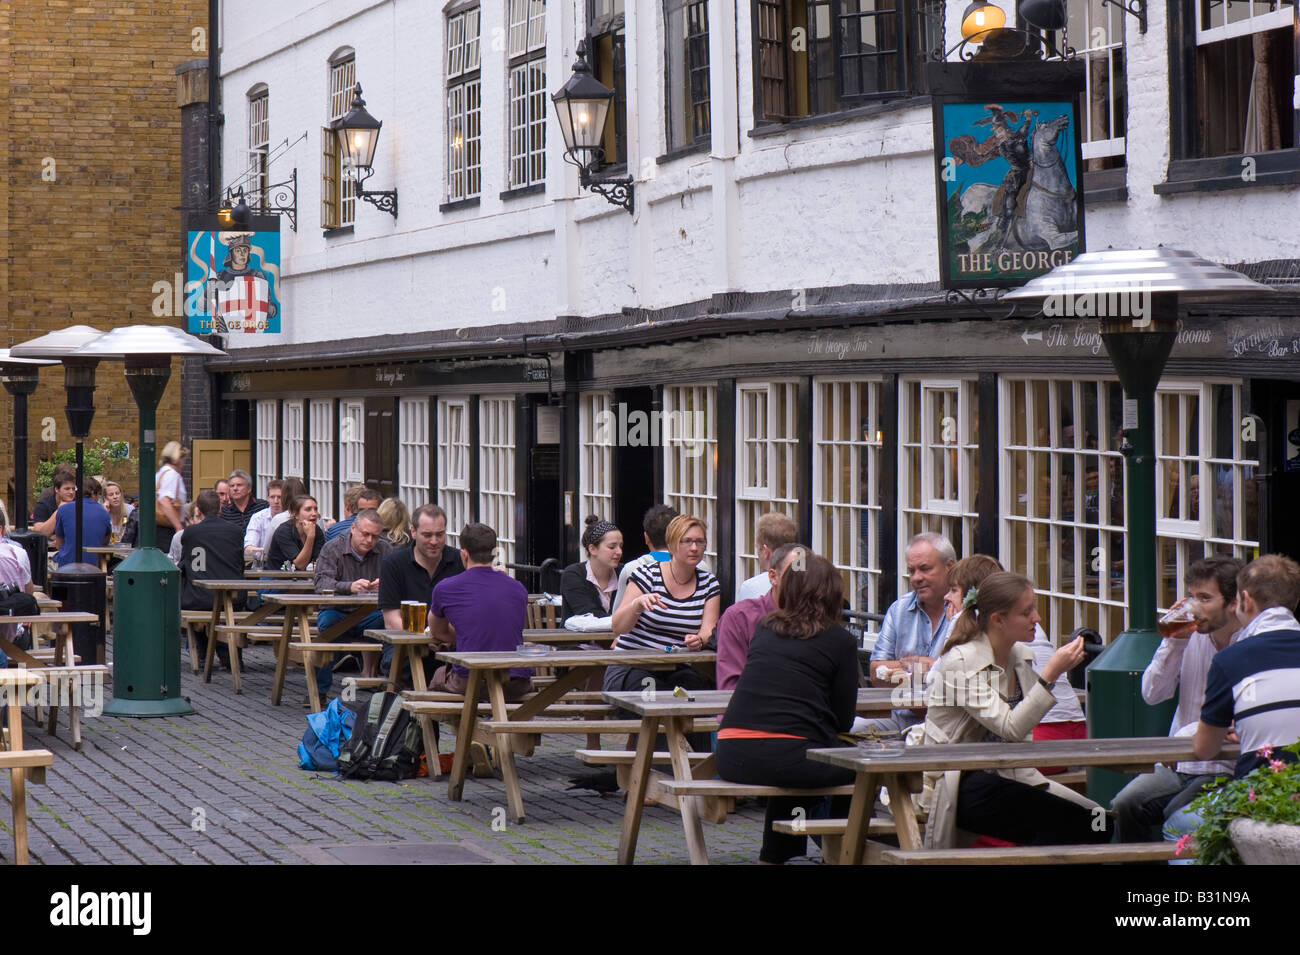 People enjoy drinking wine and beer at The George Pub in SE1 London United Kingdom Stock Photo